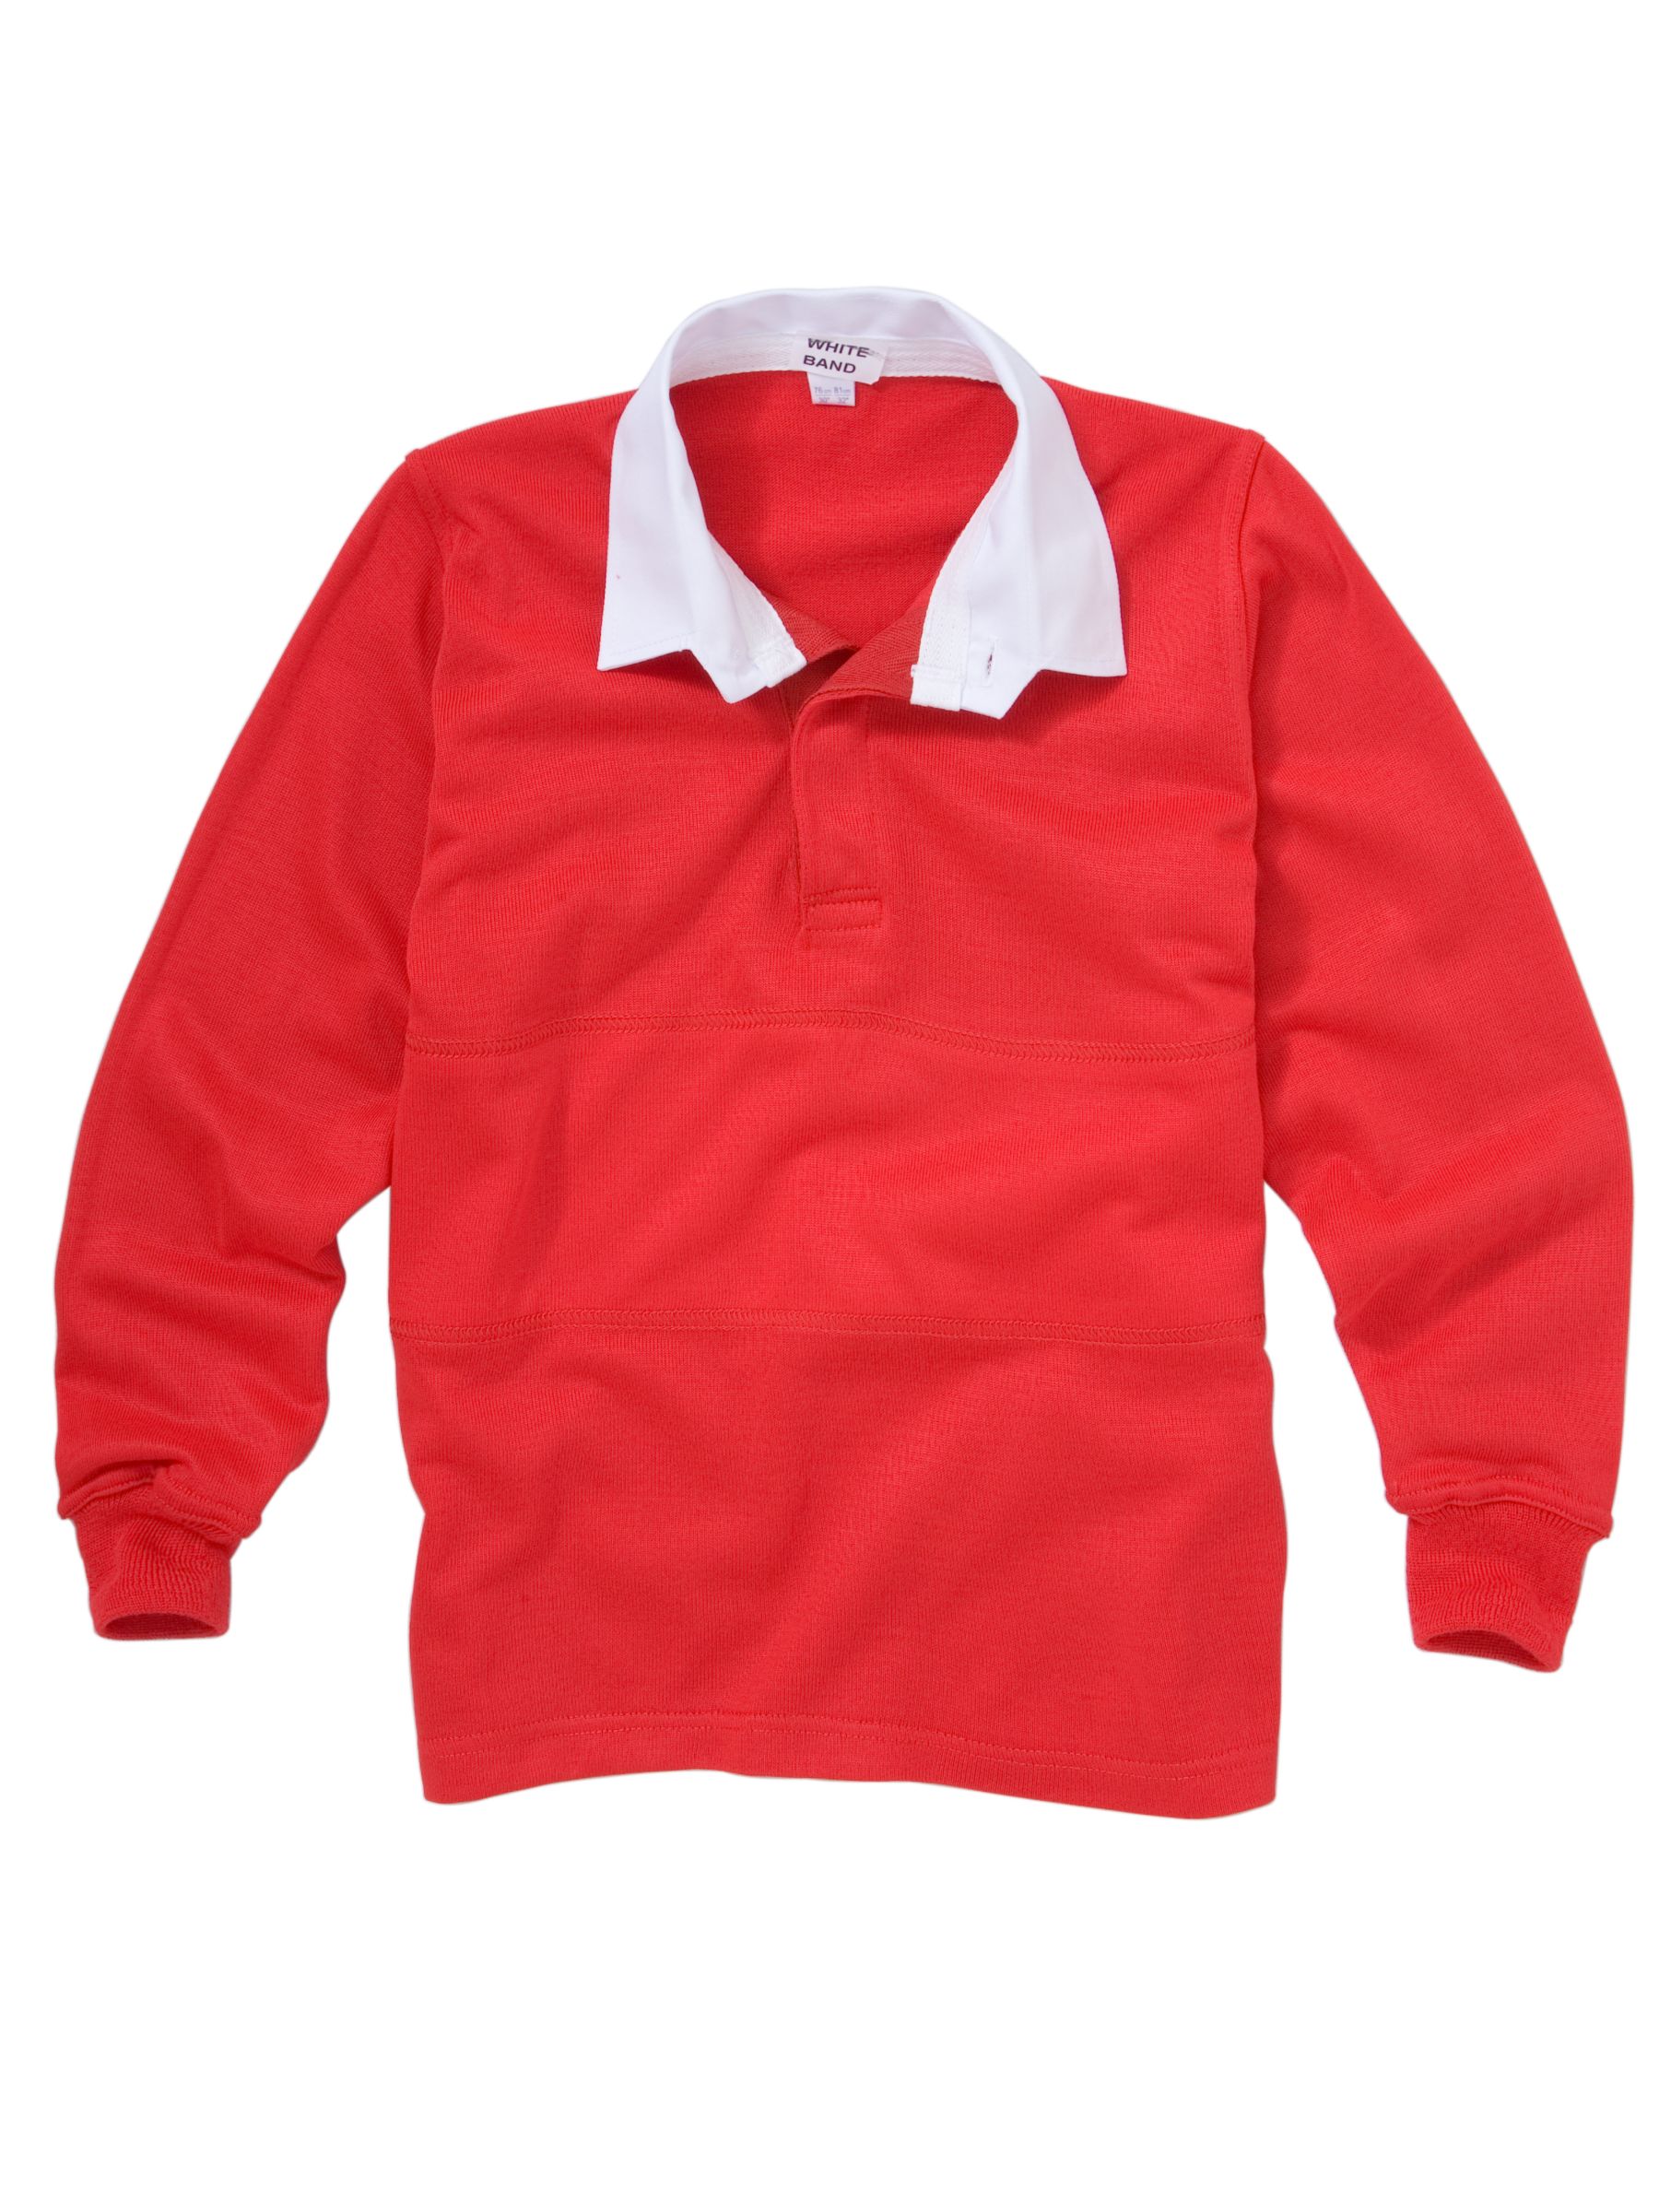 Other Schools School Boys Rugby Shirt, Red